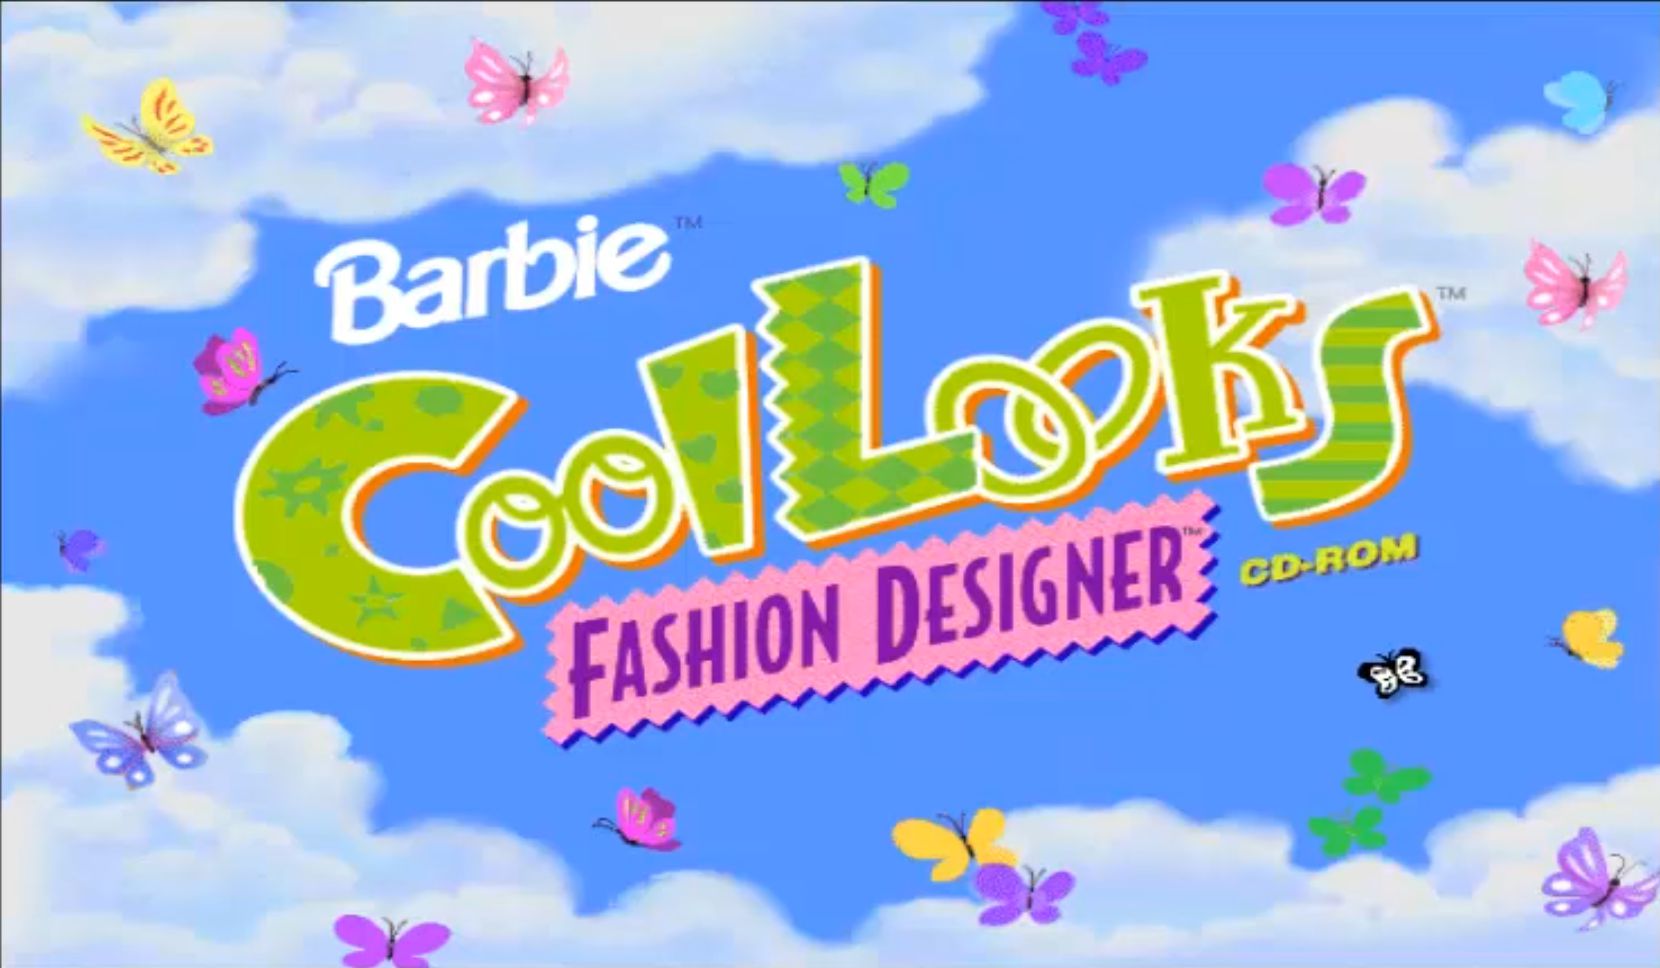 Barbie Cool Looks Fashion Designer Game Cover